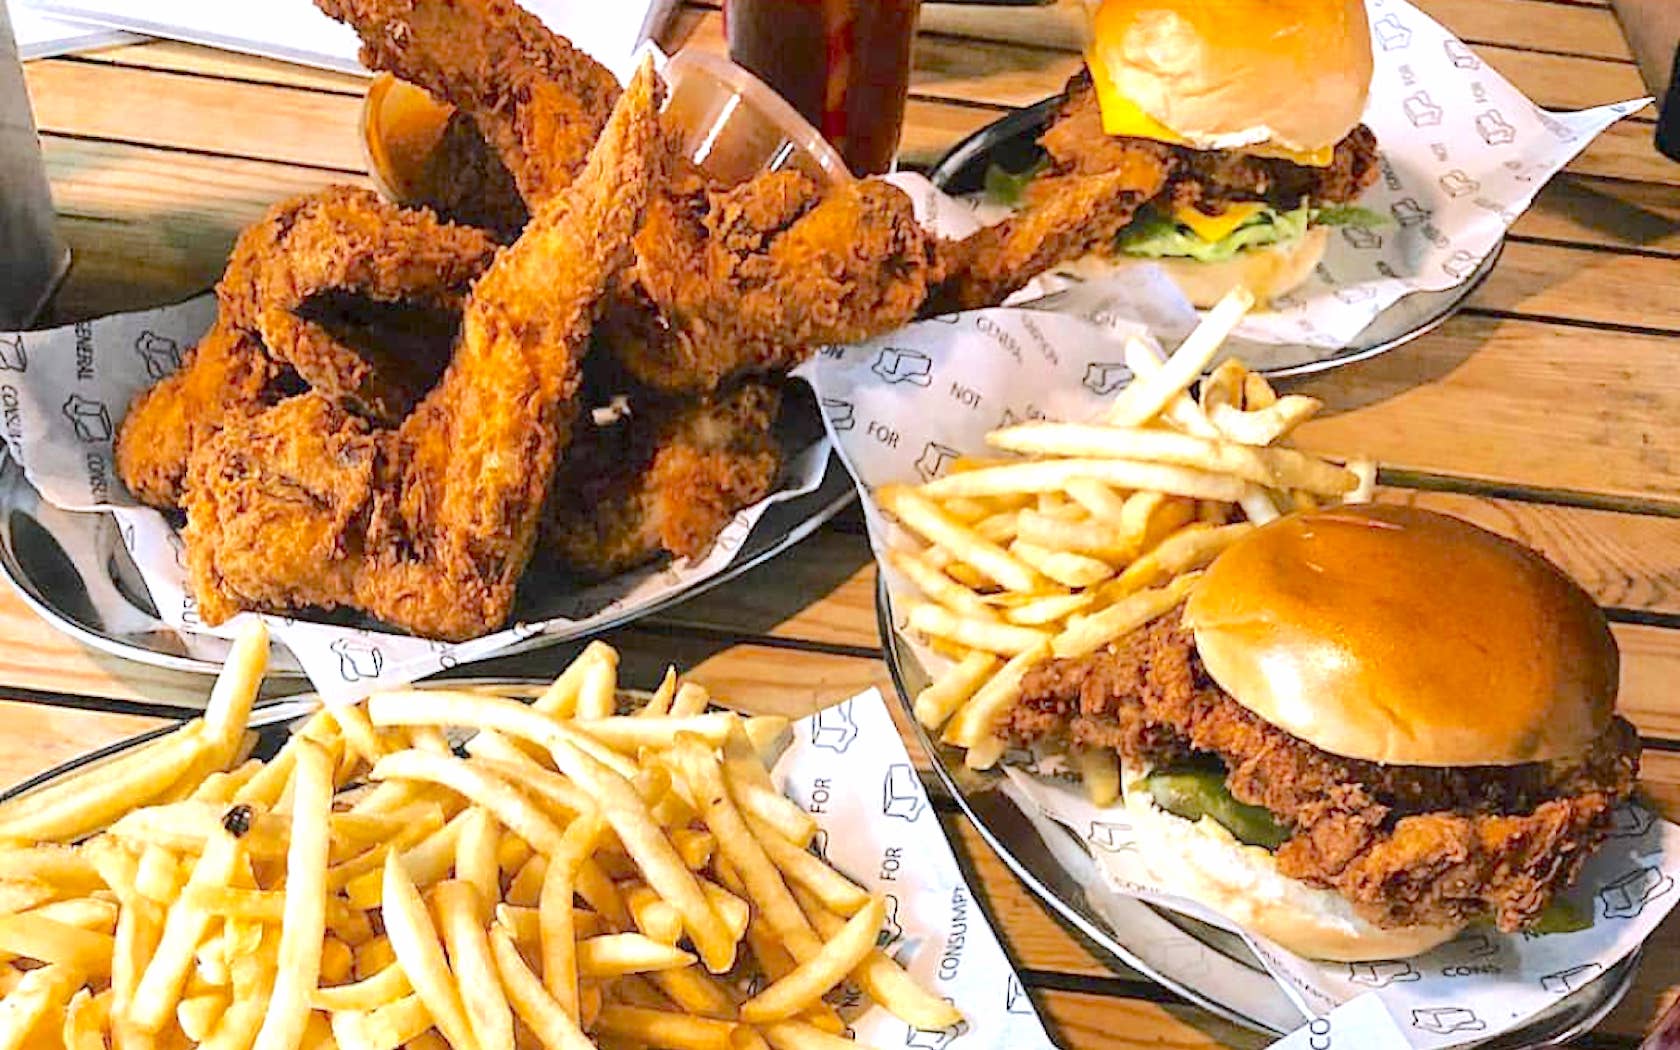 Butter's fried chicken sandwiches, wings and chips at Butter Sydney stores.